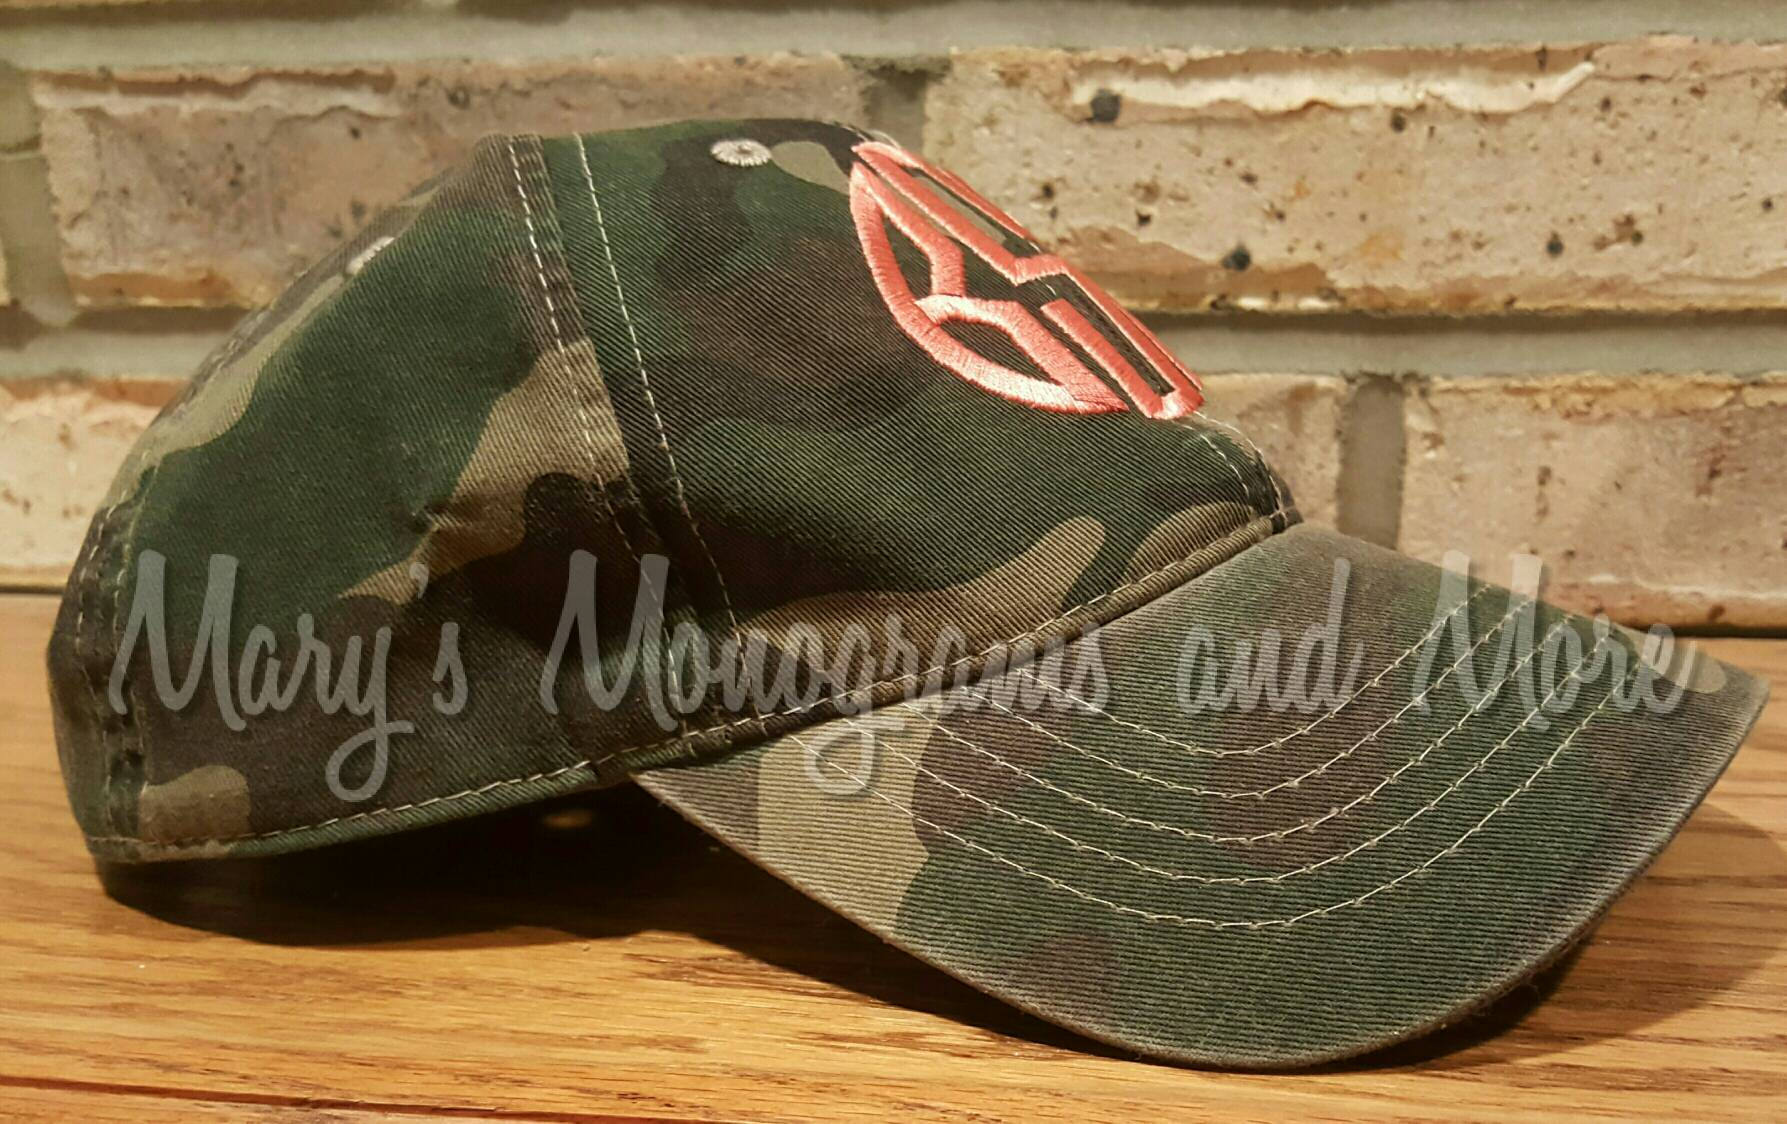 Monogrammed Camo Baseball Hat, Embroidered, Personalized,  Camouflage, Monogram, Ball Cap, Army Camo Hats With Mono, Military, Country